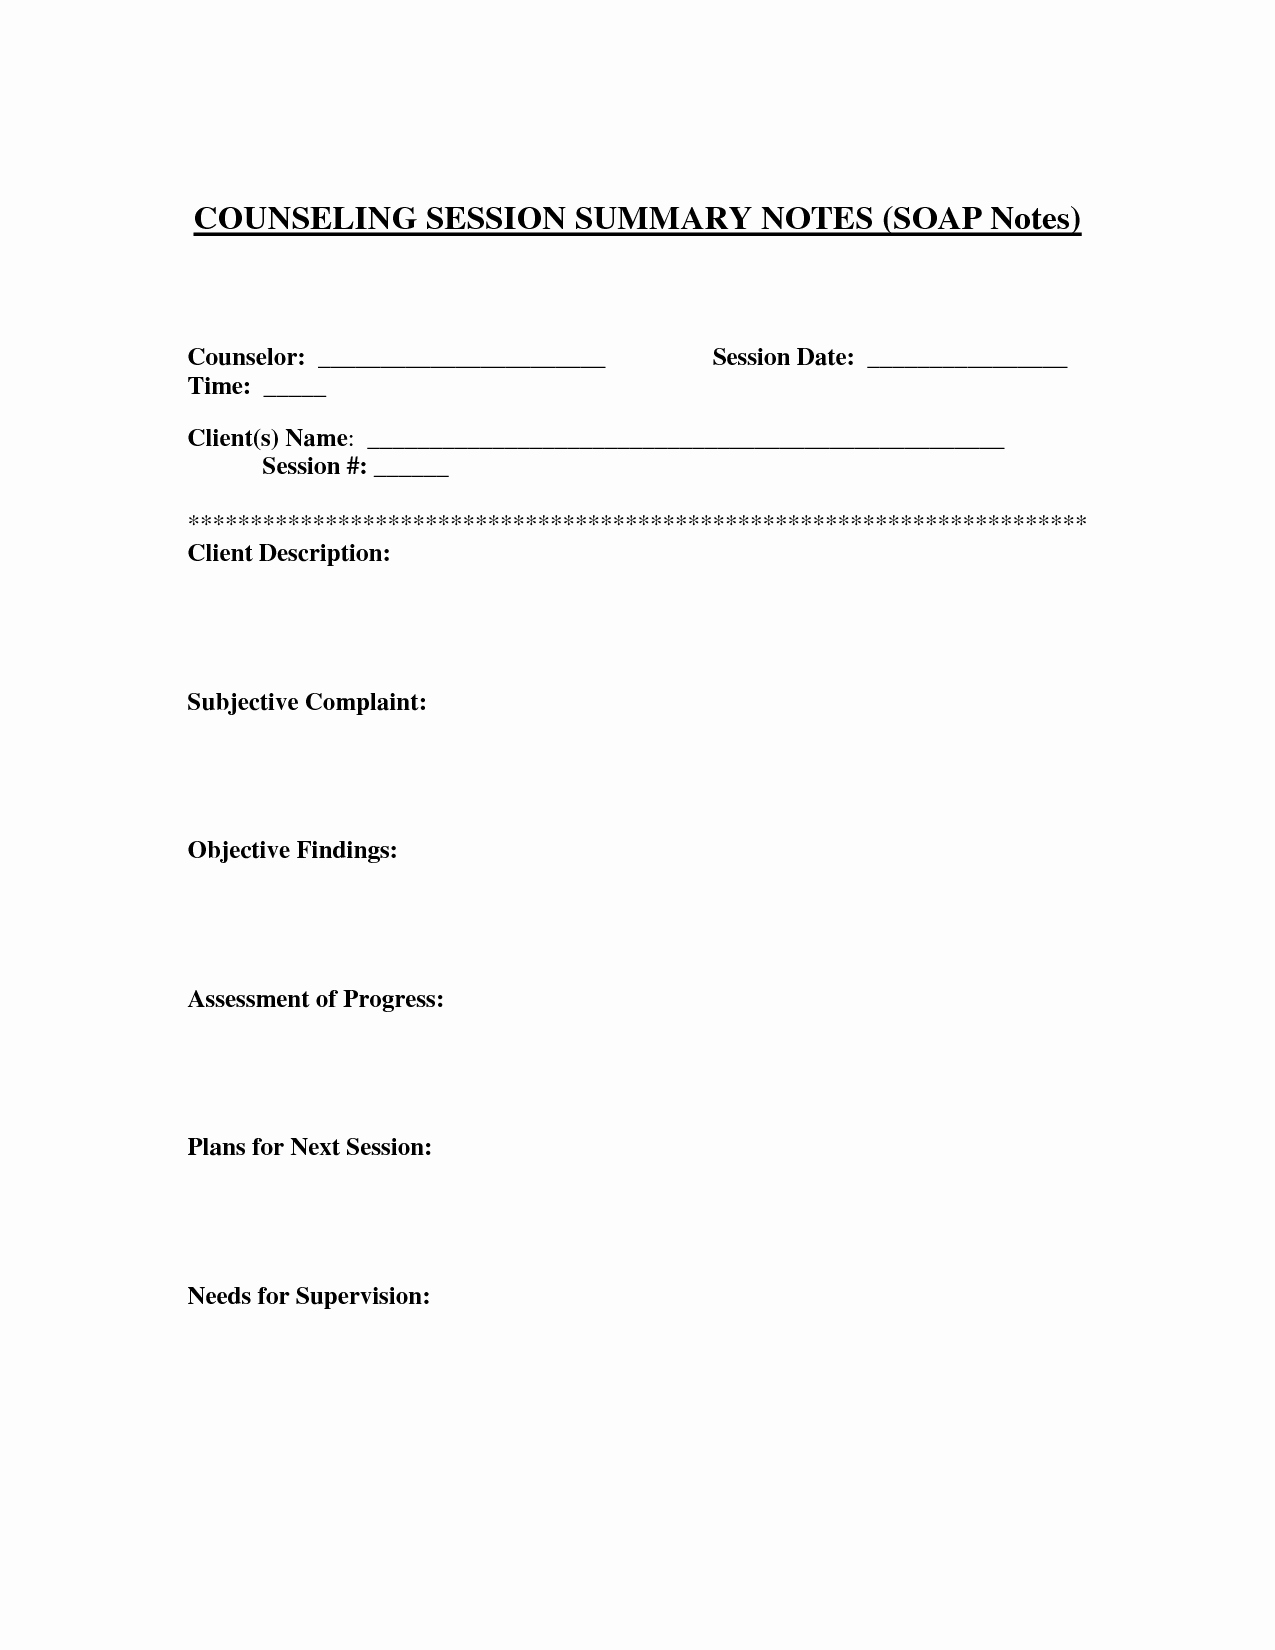 Free soap Note Template New soap Notes Template for Counseling Google Search